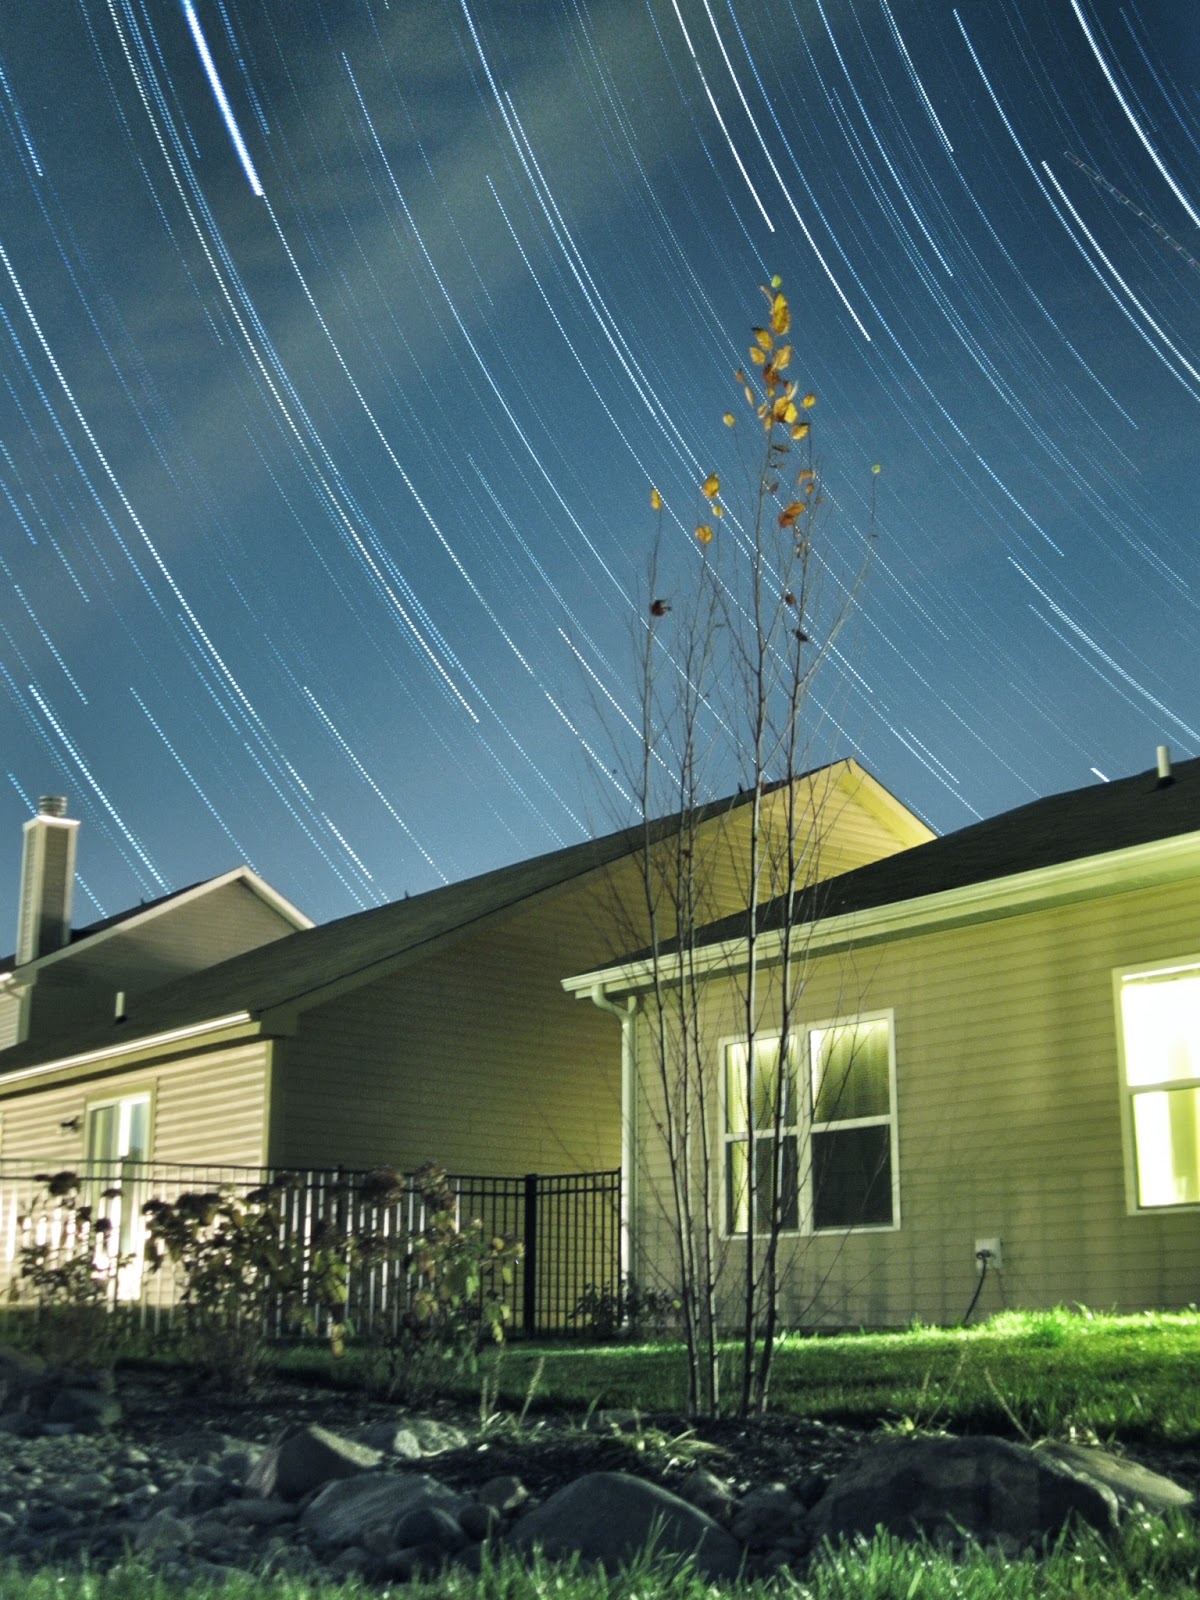 star trails with hdr effect